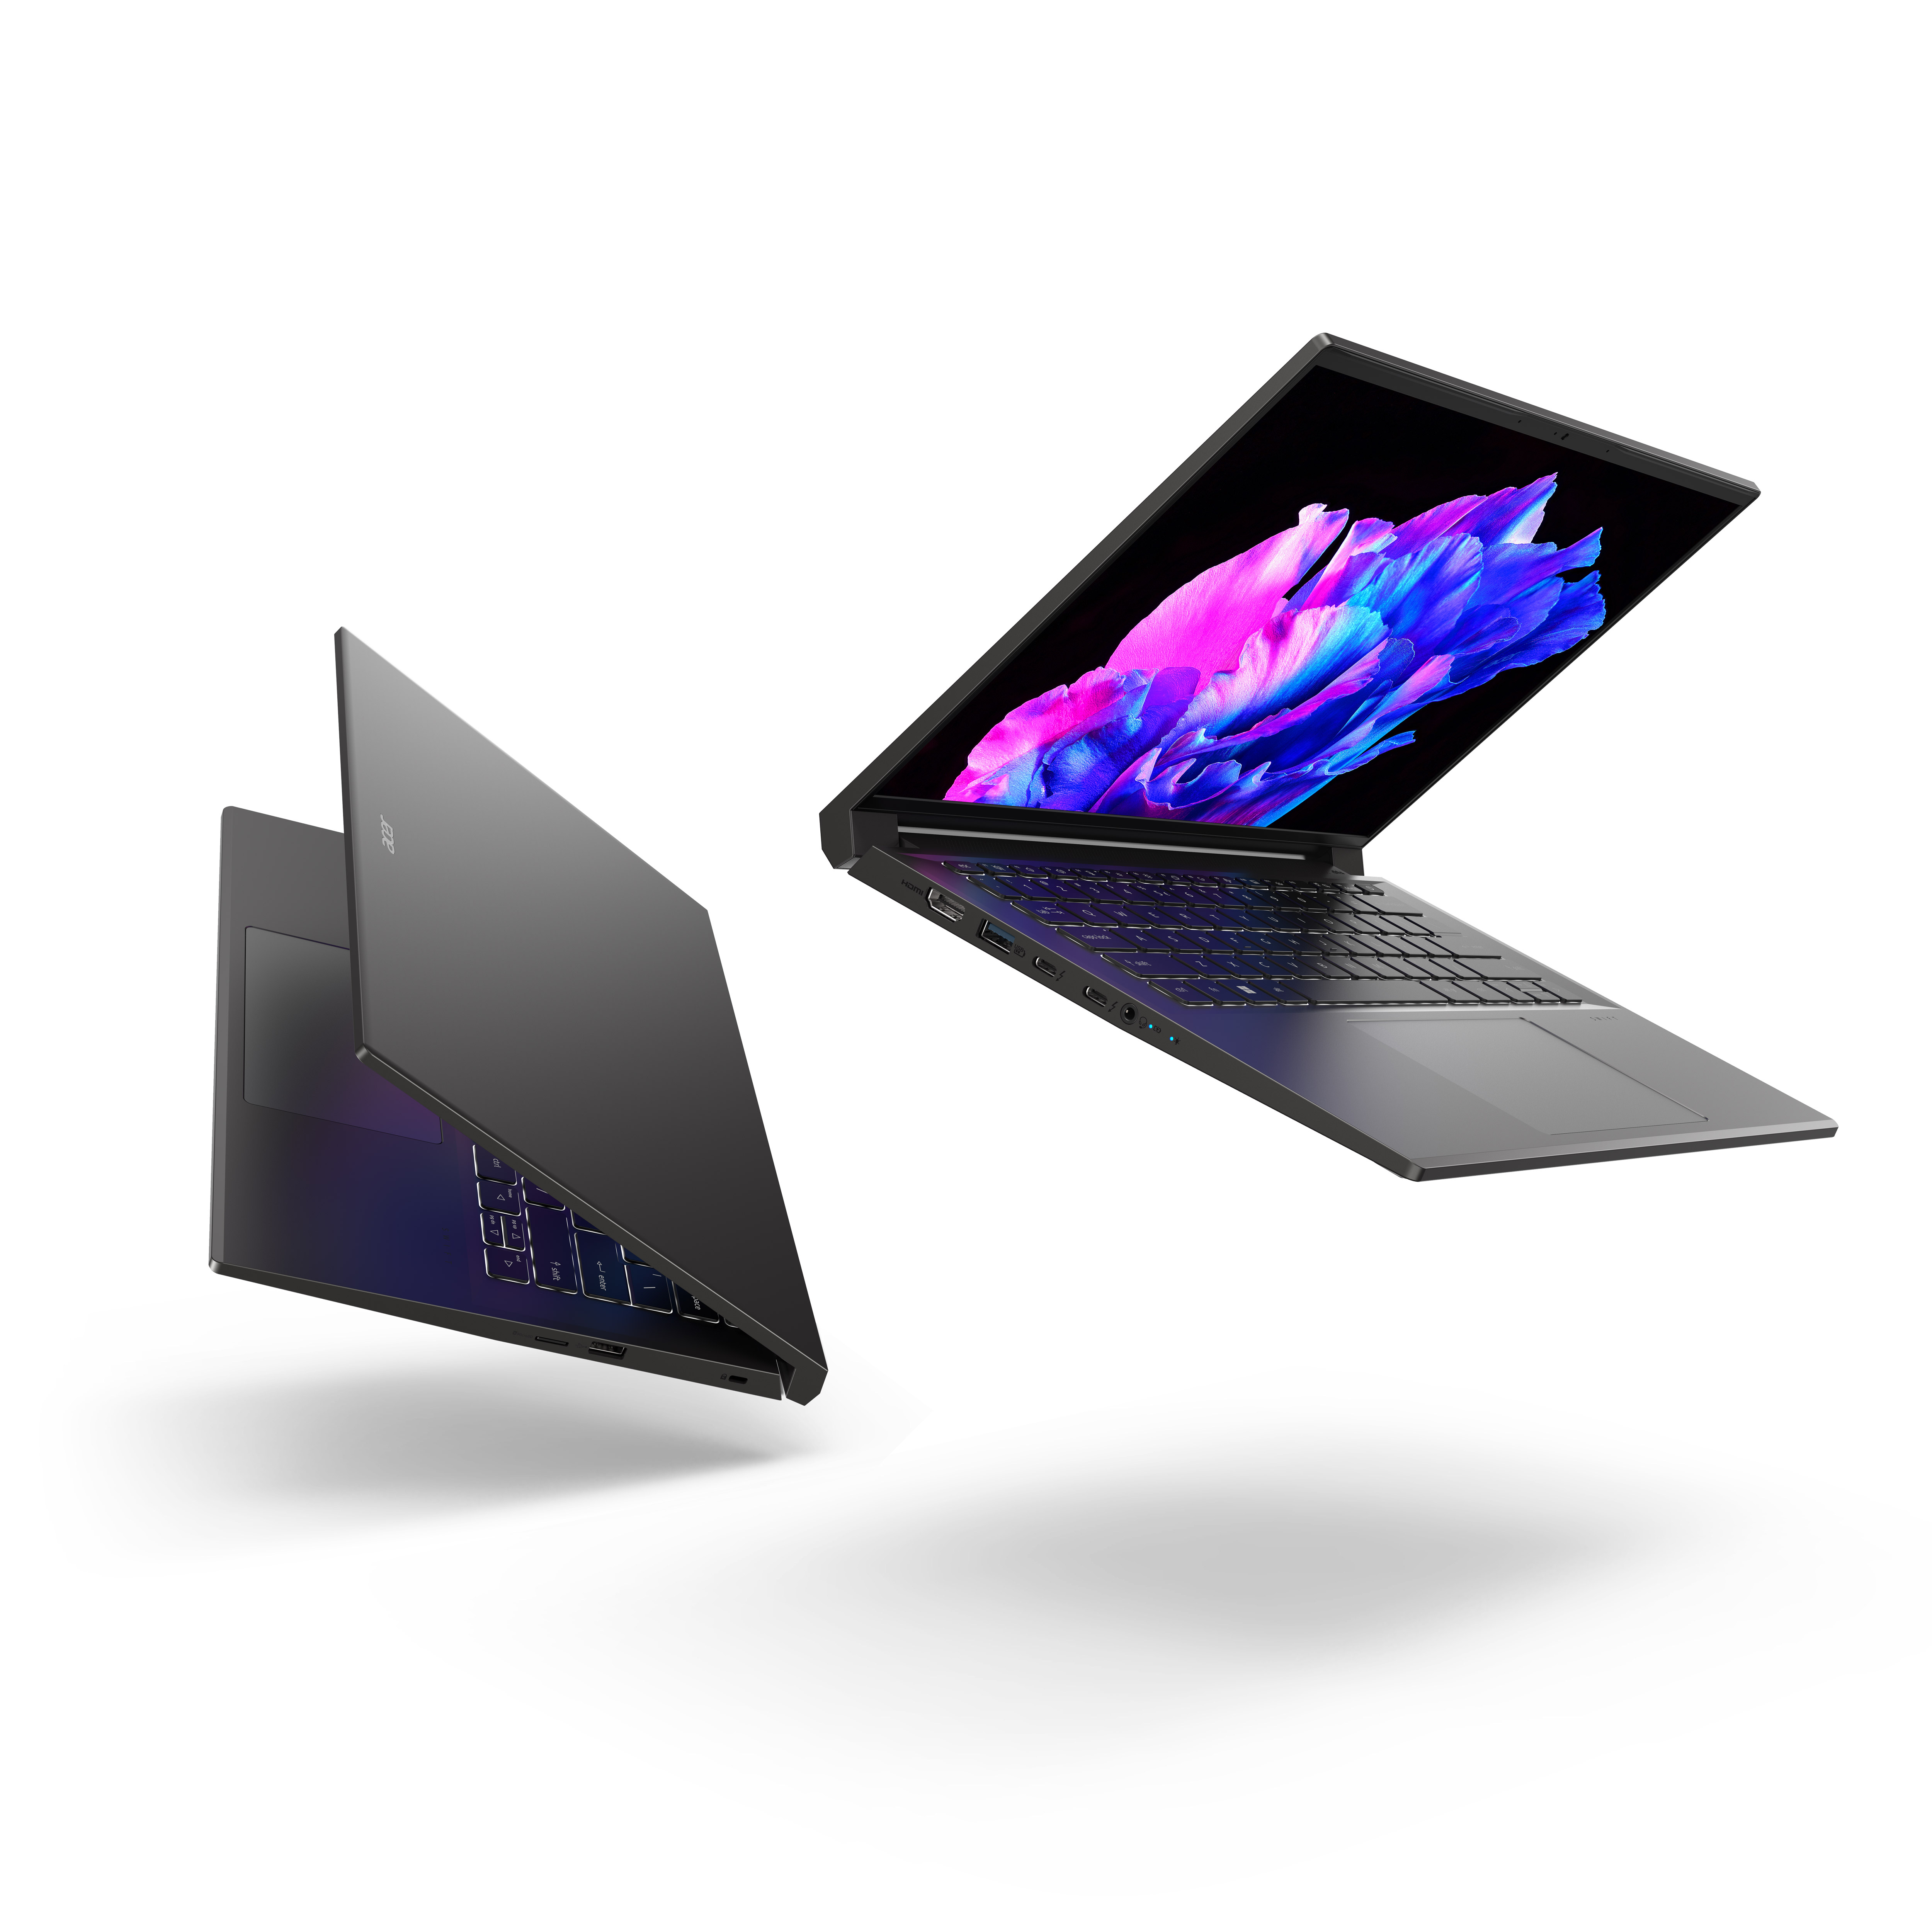 Acer Debuts New Swift Go, a ThinandLight Laptop with OLED Display